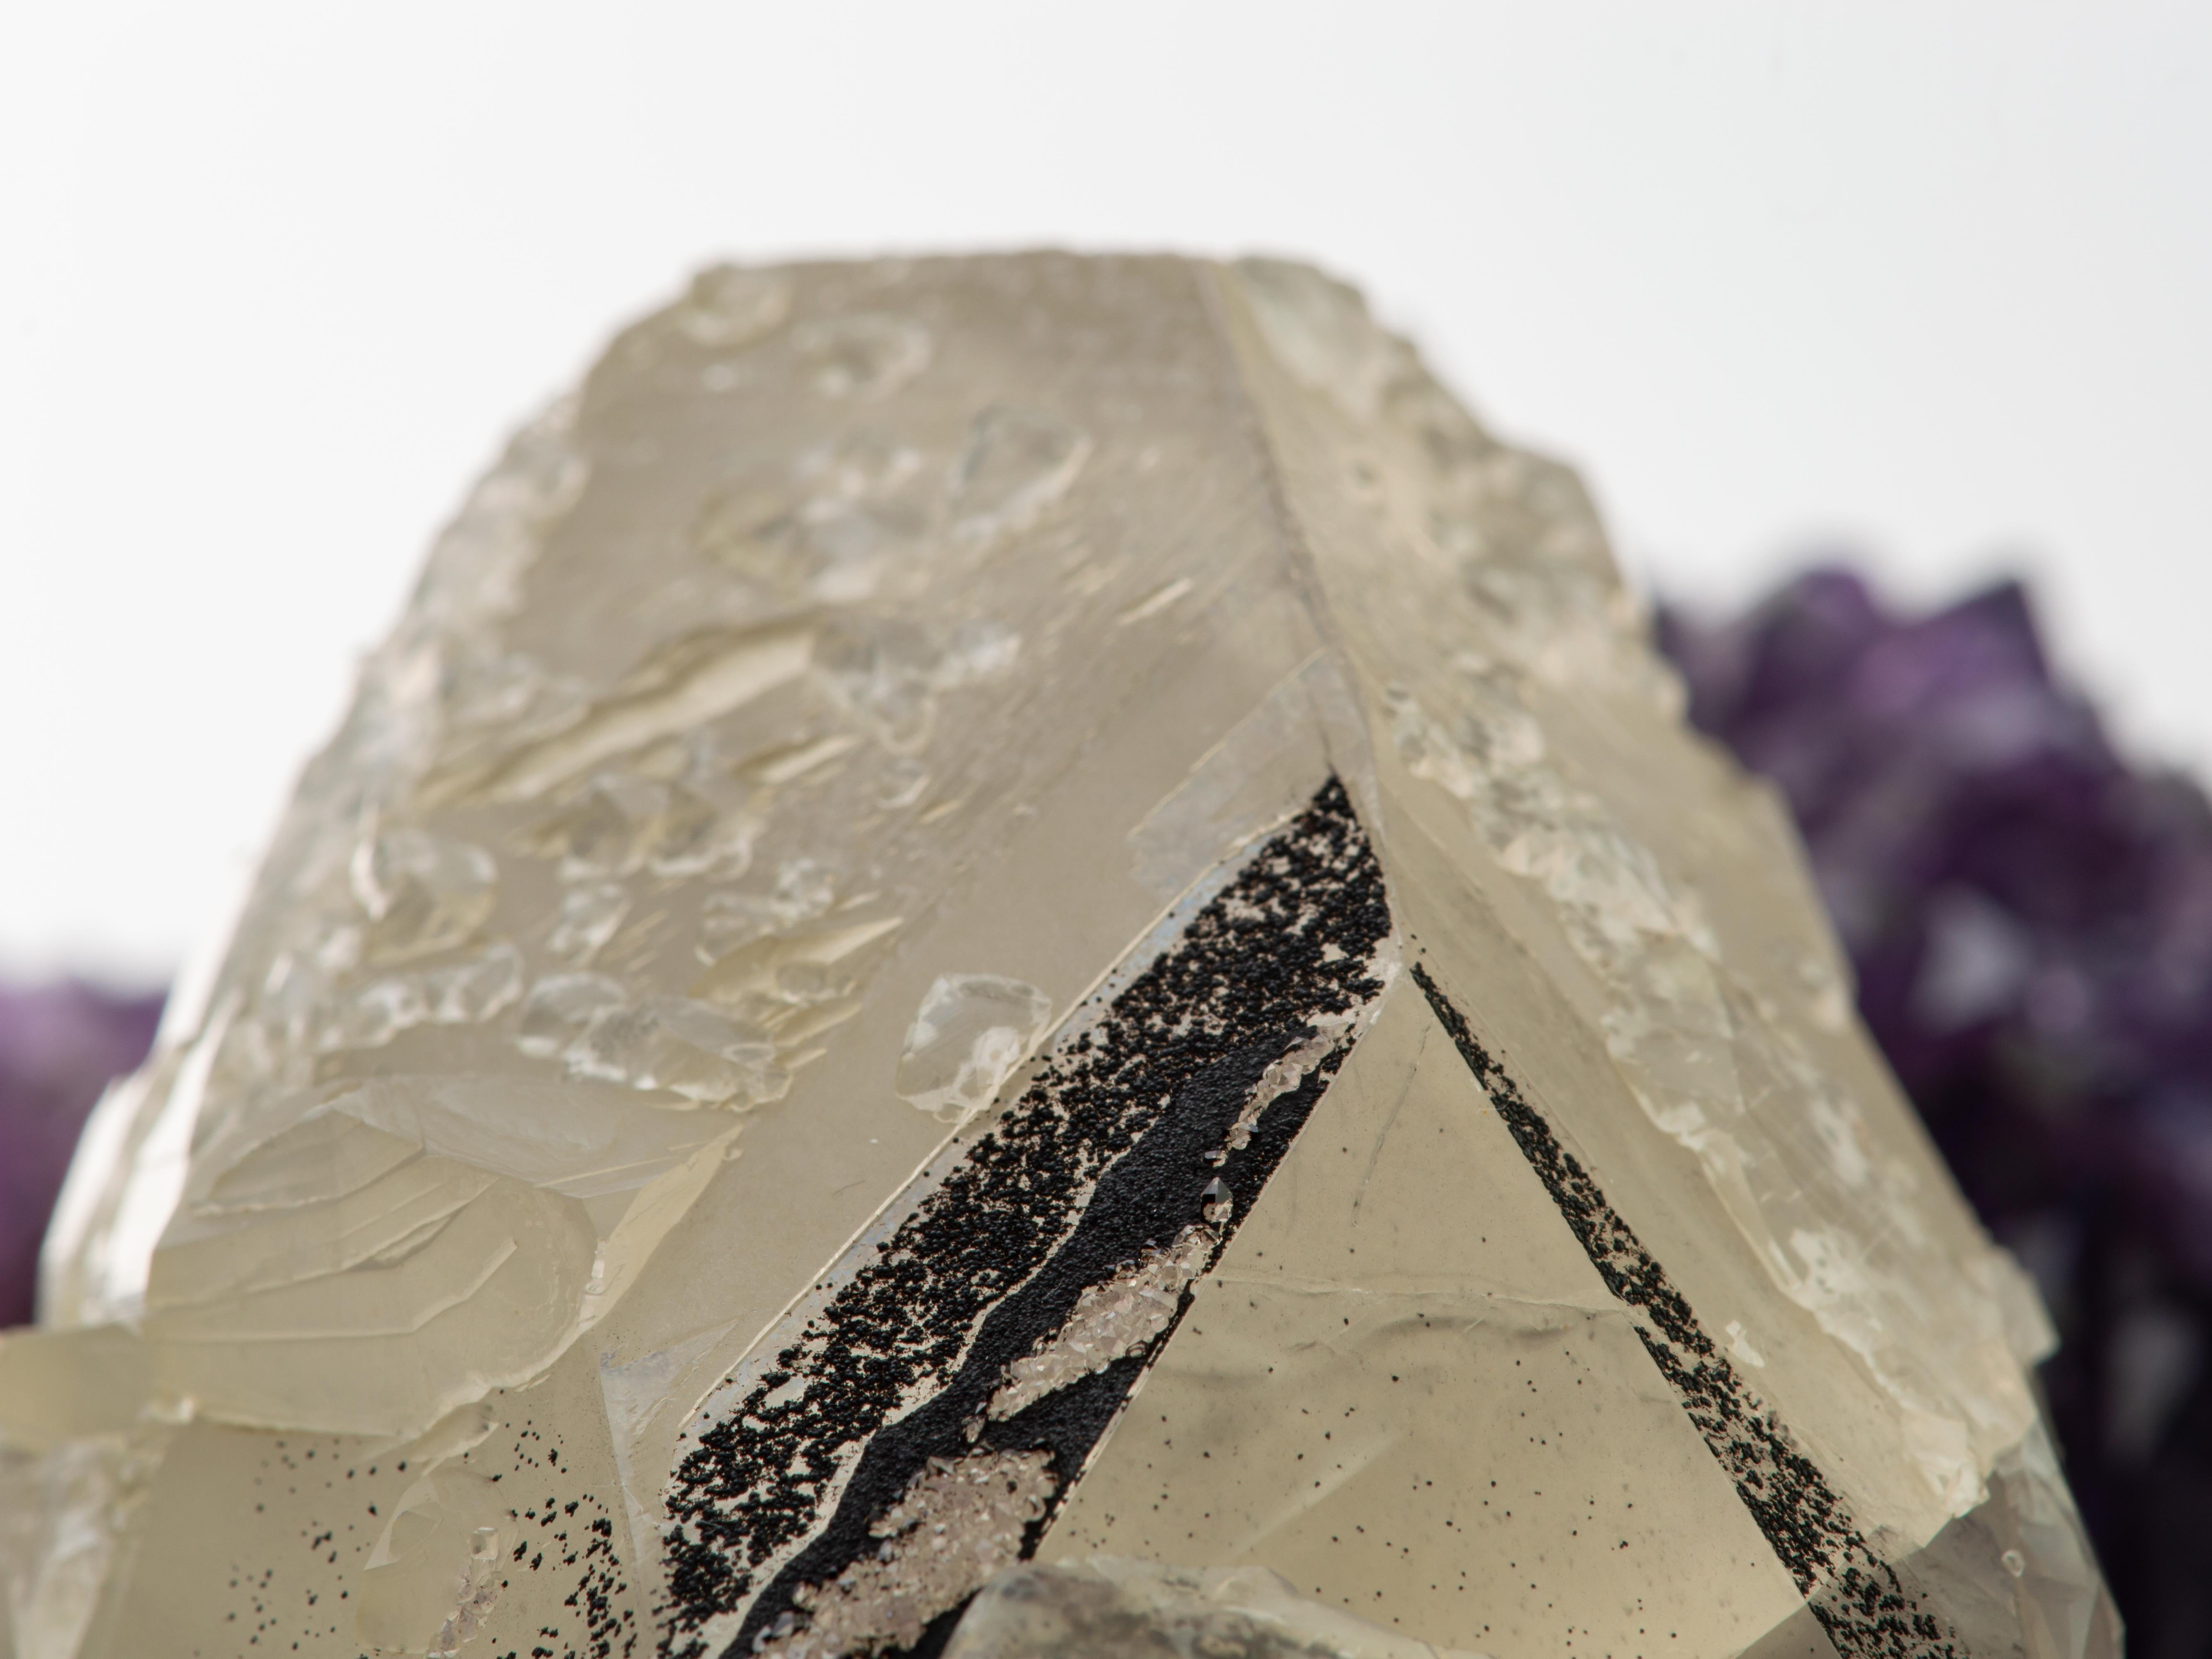 Agate Amethyst calcite and black epitaxial goethite - a rare stone formation For Sale